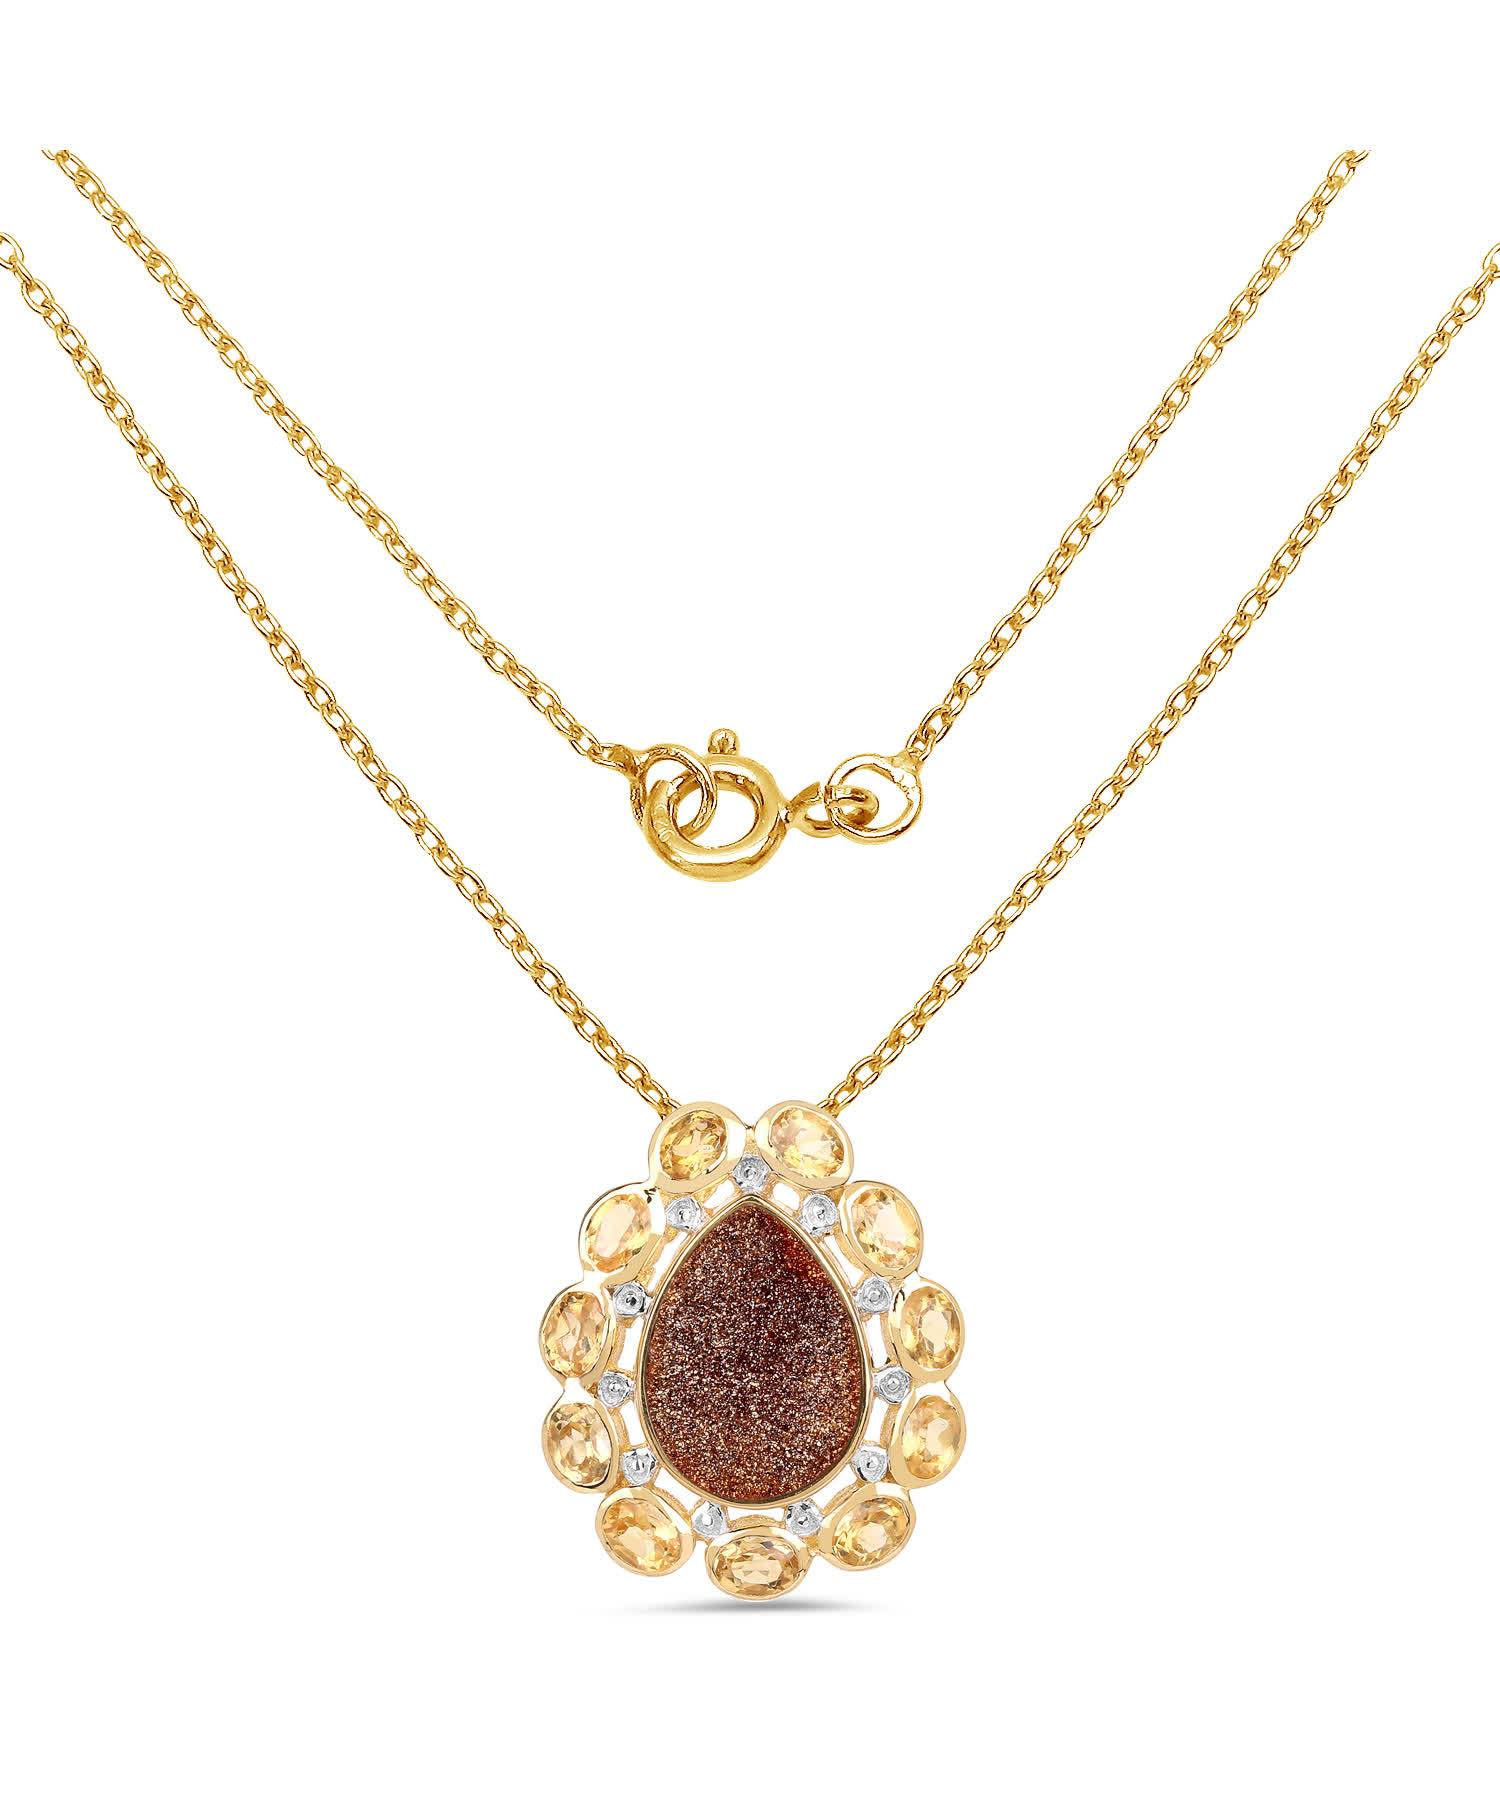 5.14ctw Natural Drusy Agate and Citrine 14k Gold Plated 925 Sterling Silver Pendant With Chain View 2